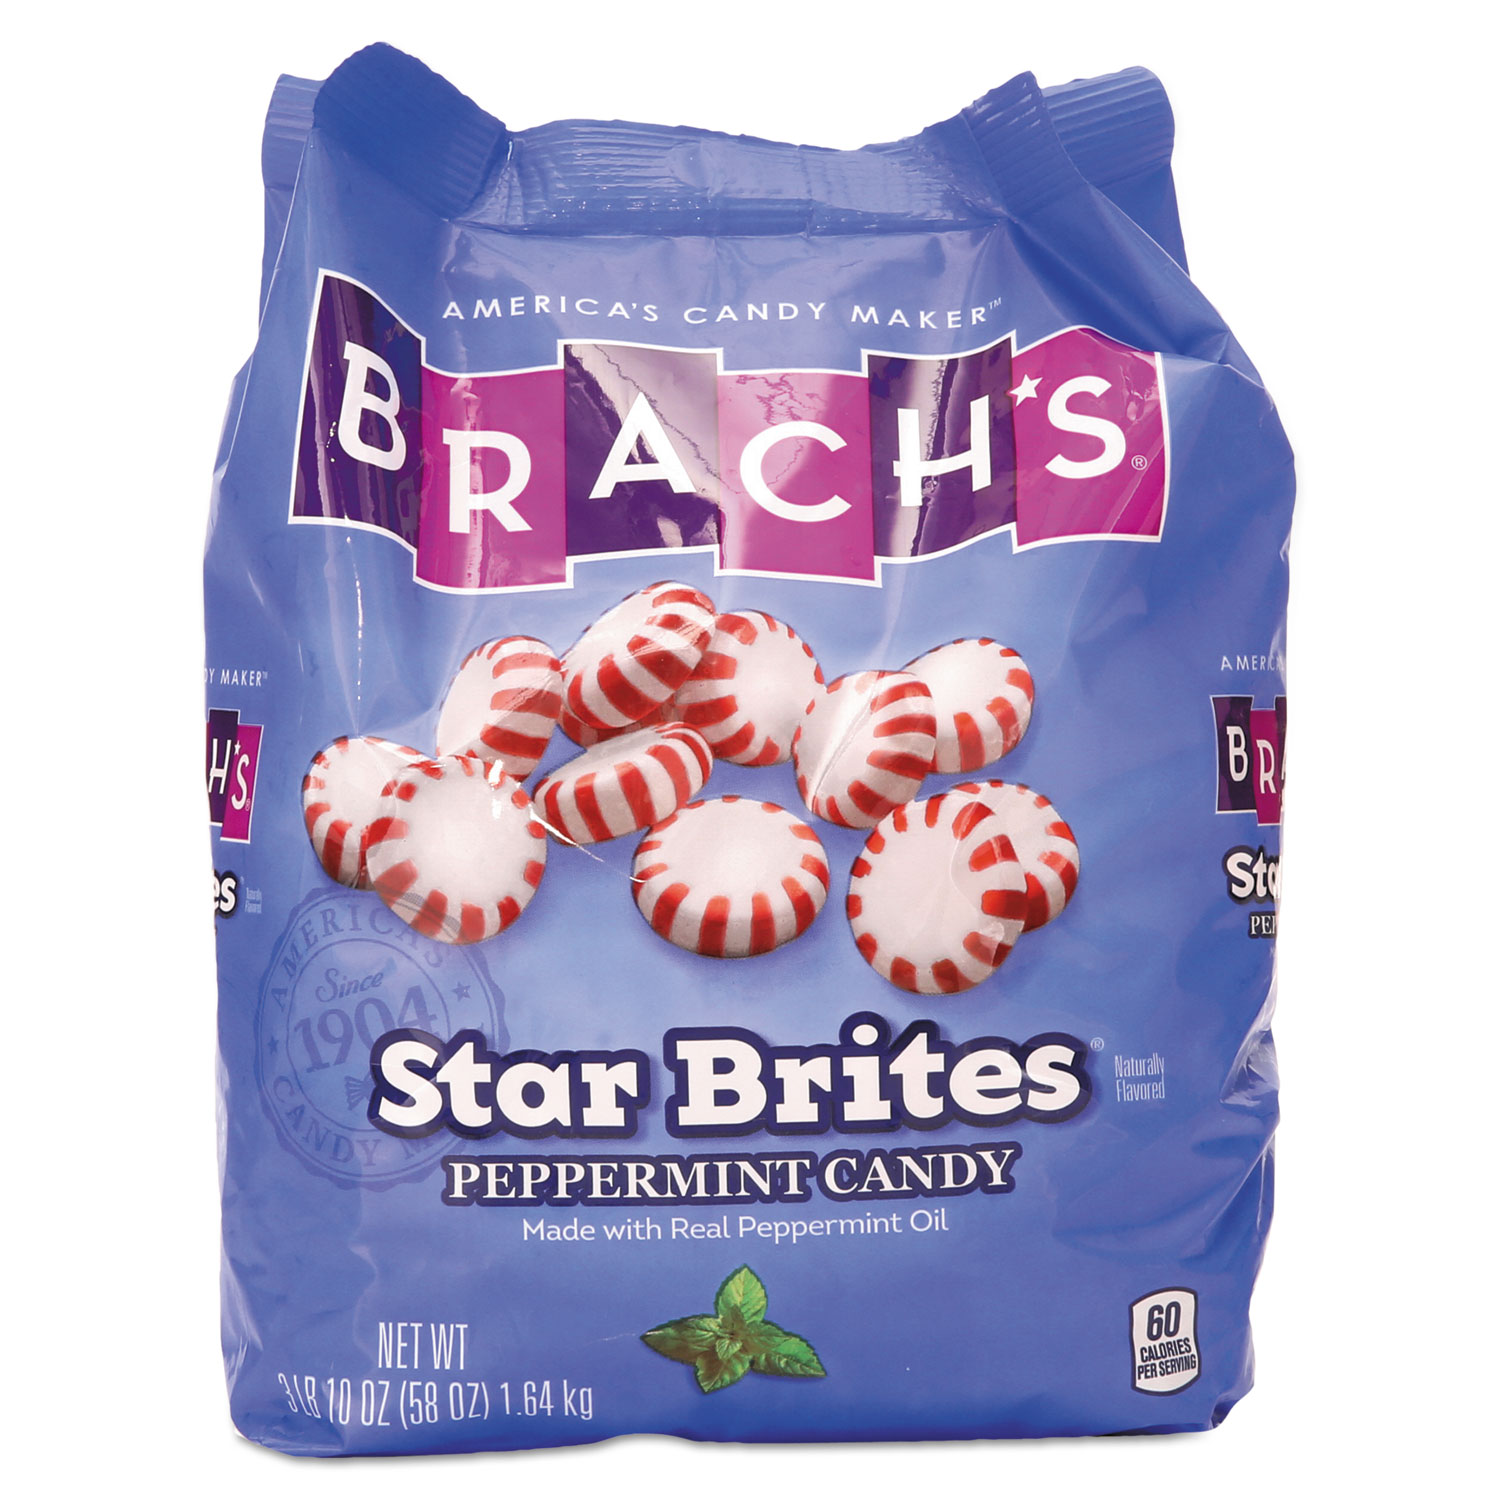  Brach's 827132 Star Brites Peppermint Candy, Individually Wrapped, 58 oz Bag (BCH827132) 